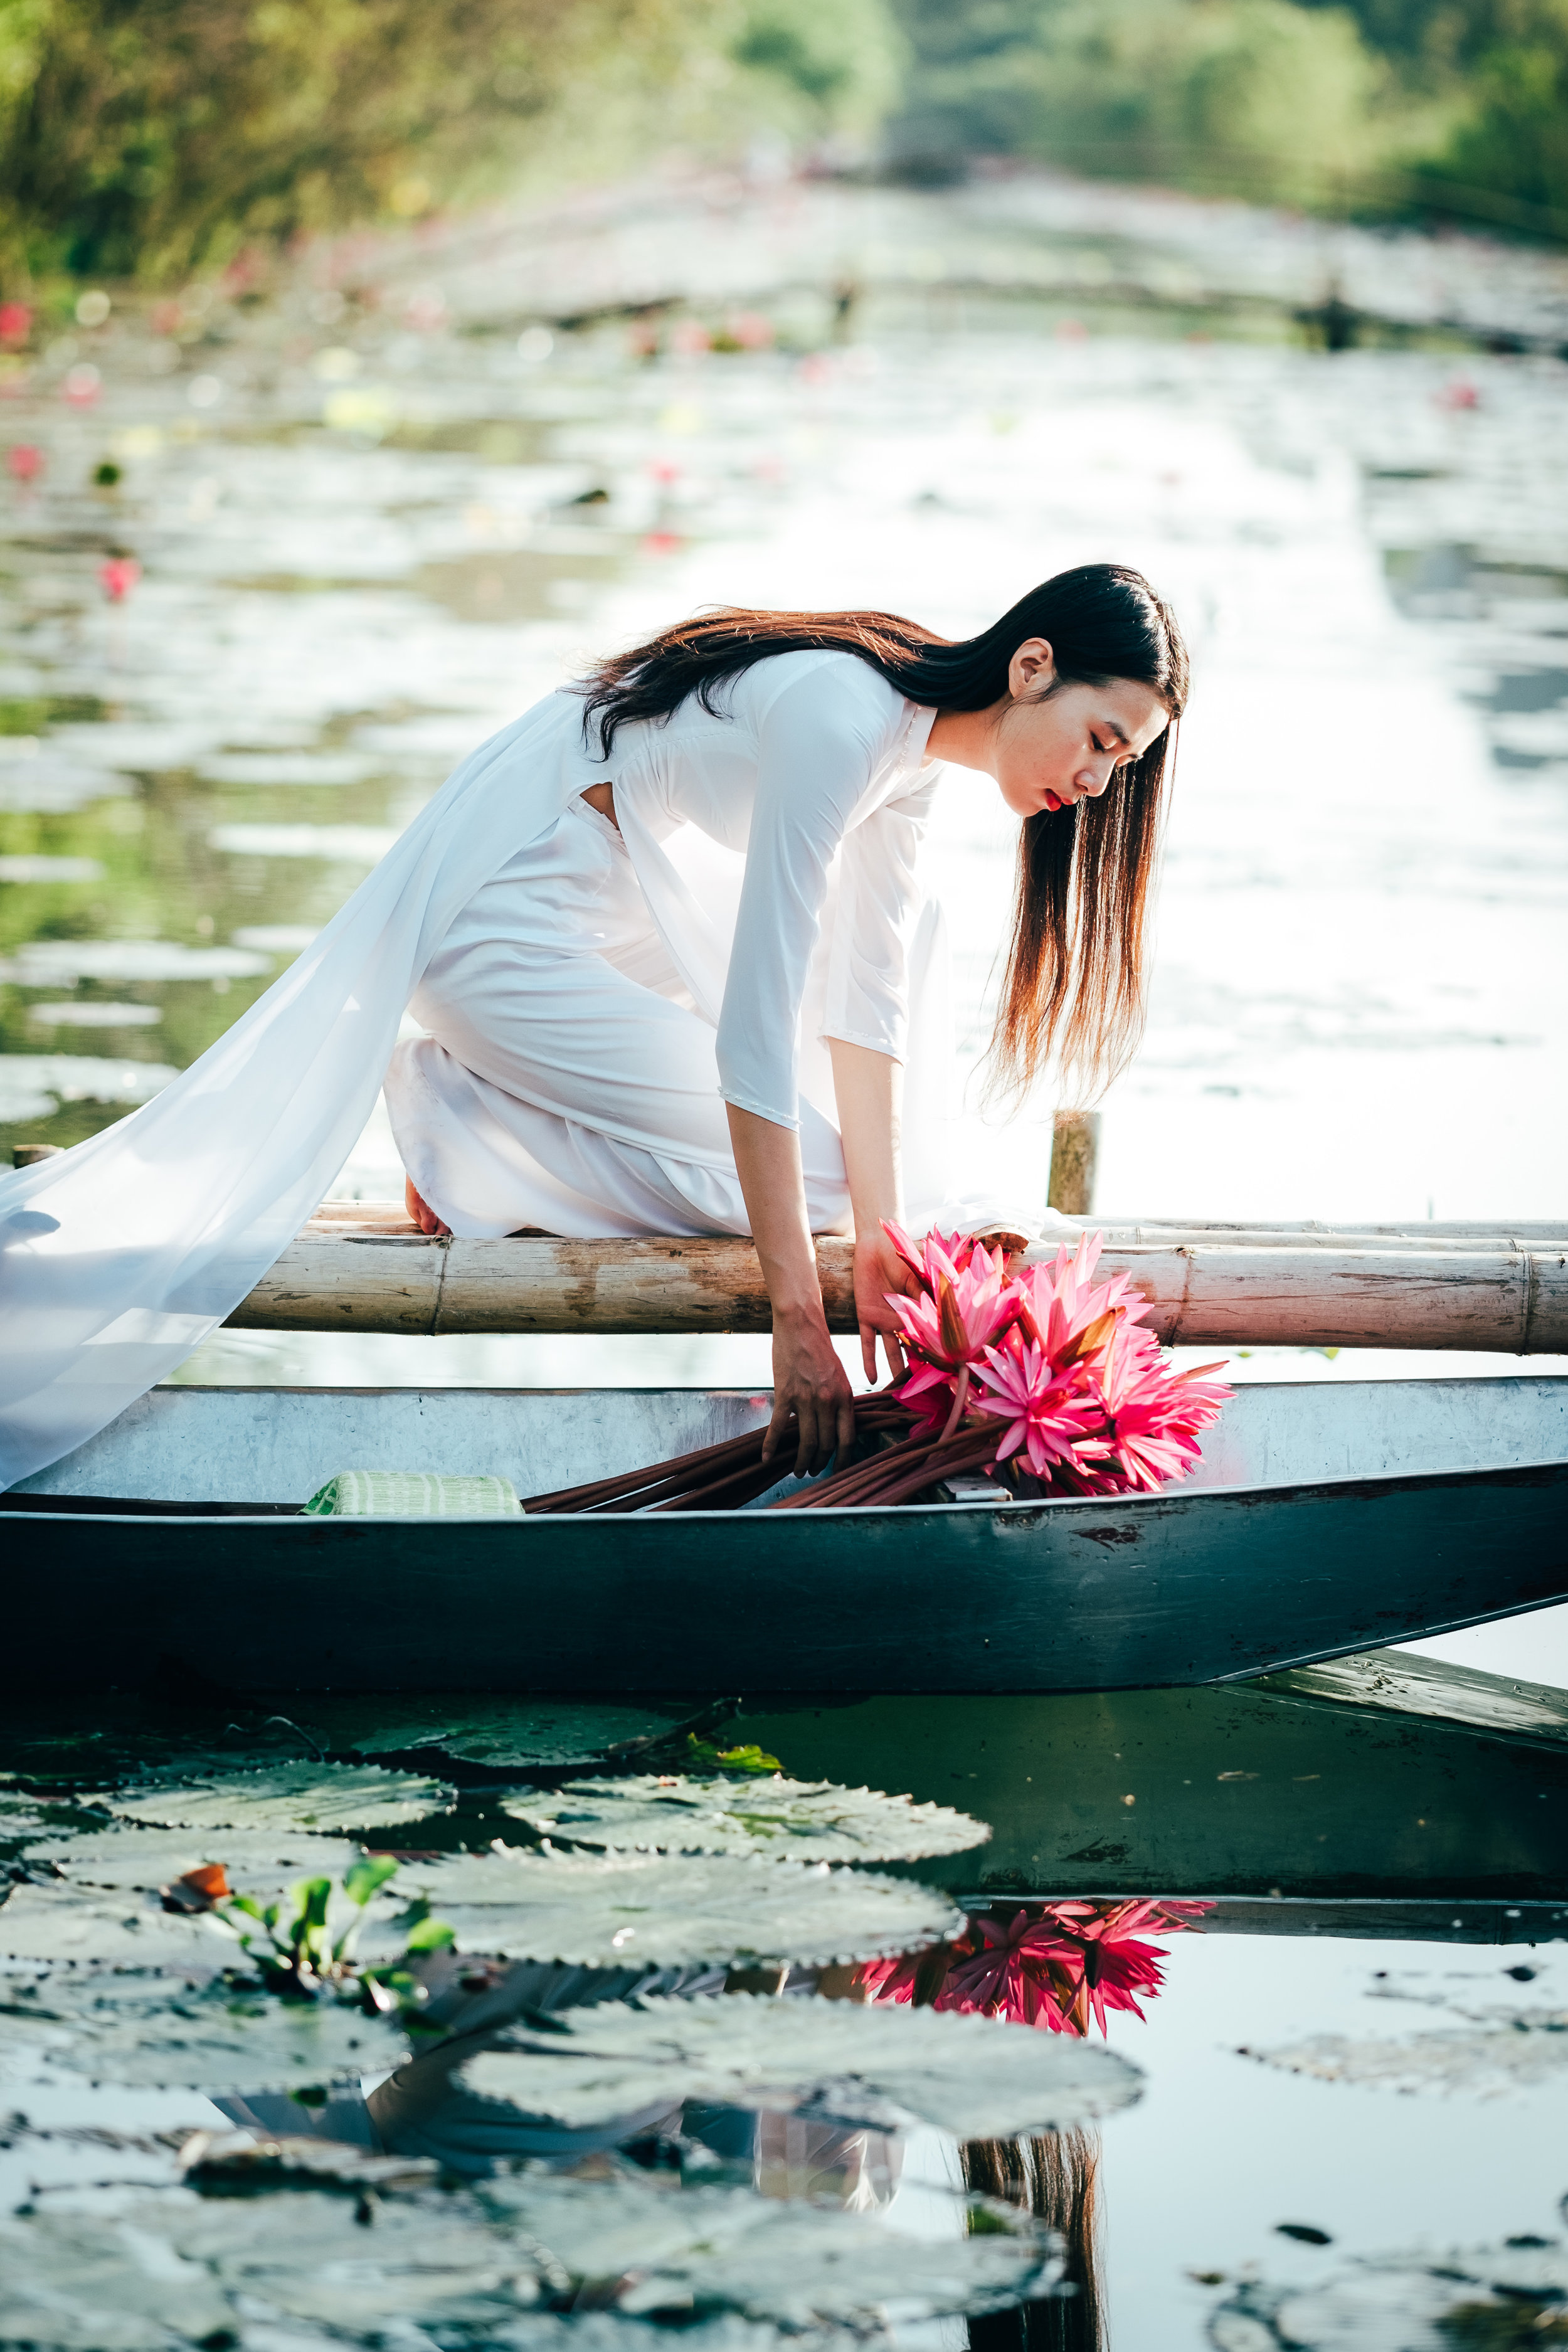 Vietnam model in traditional dress collecting lotus